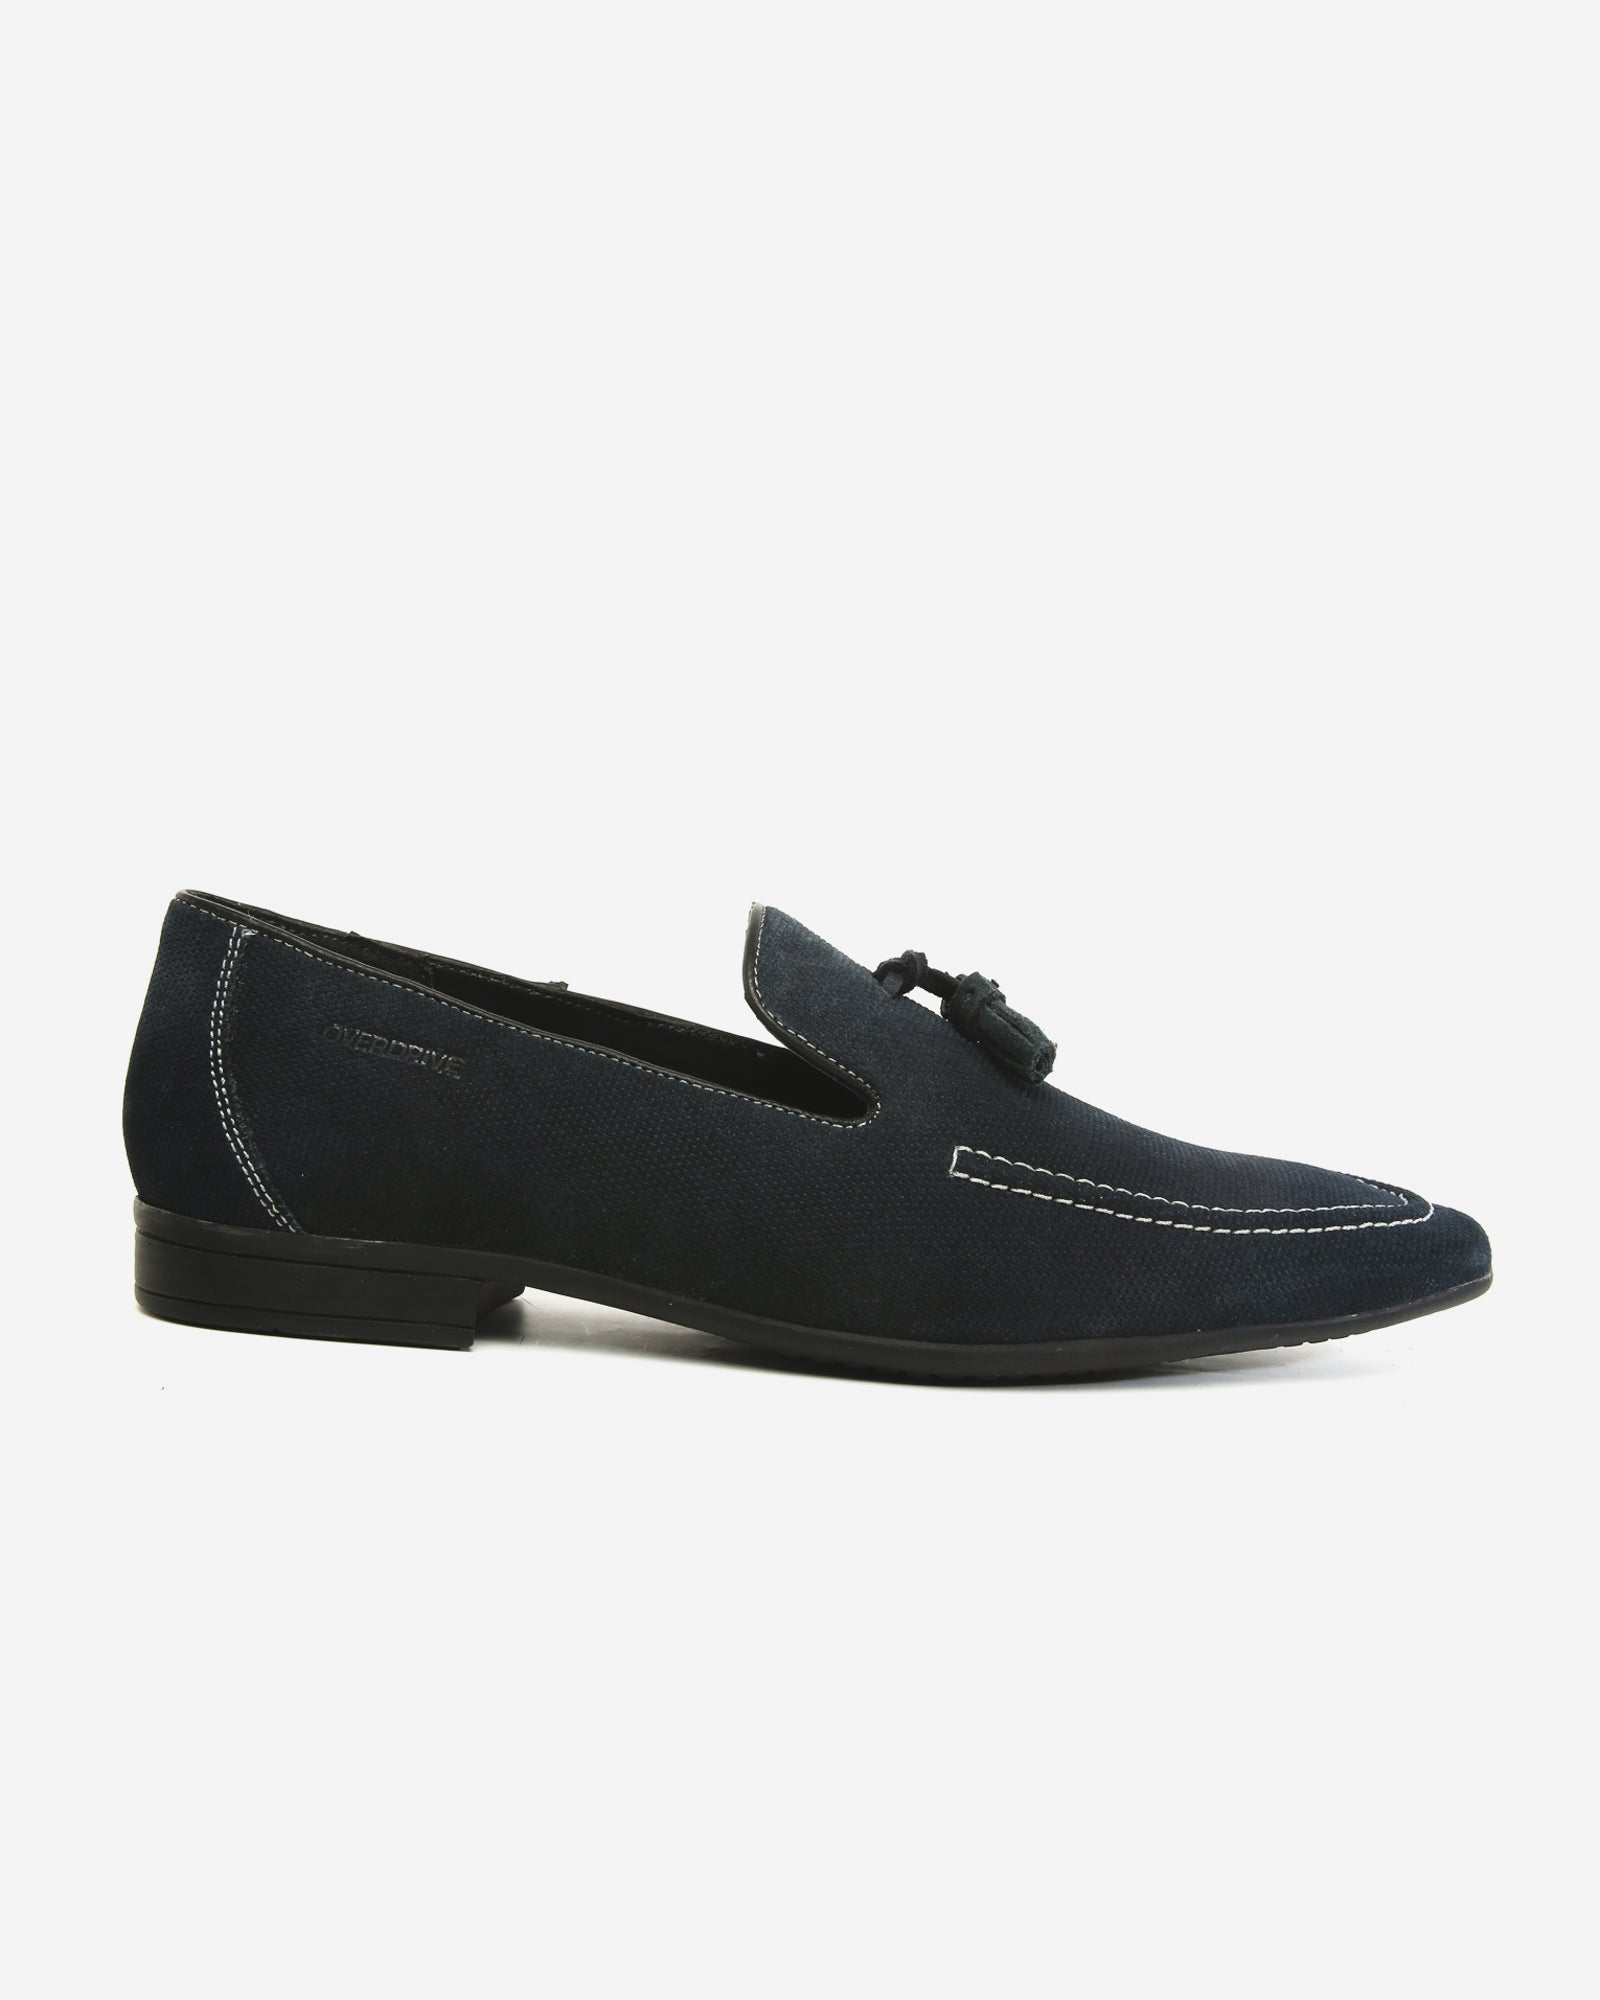 Denims Blue Loafer with Tassels